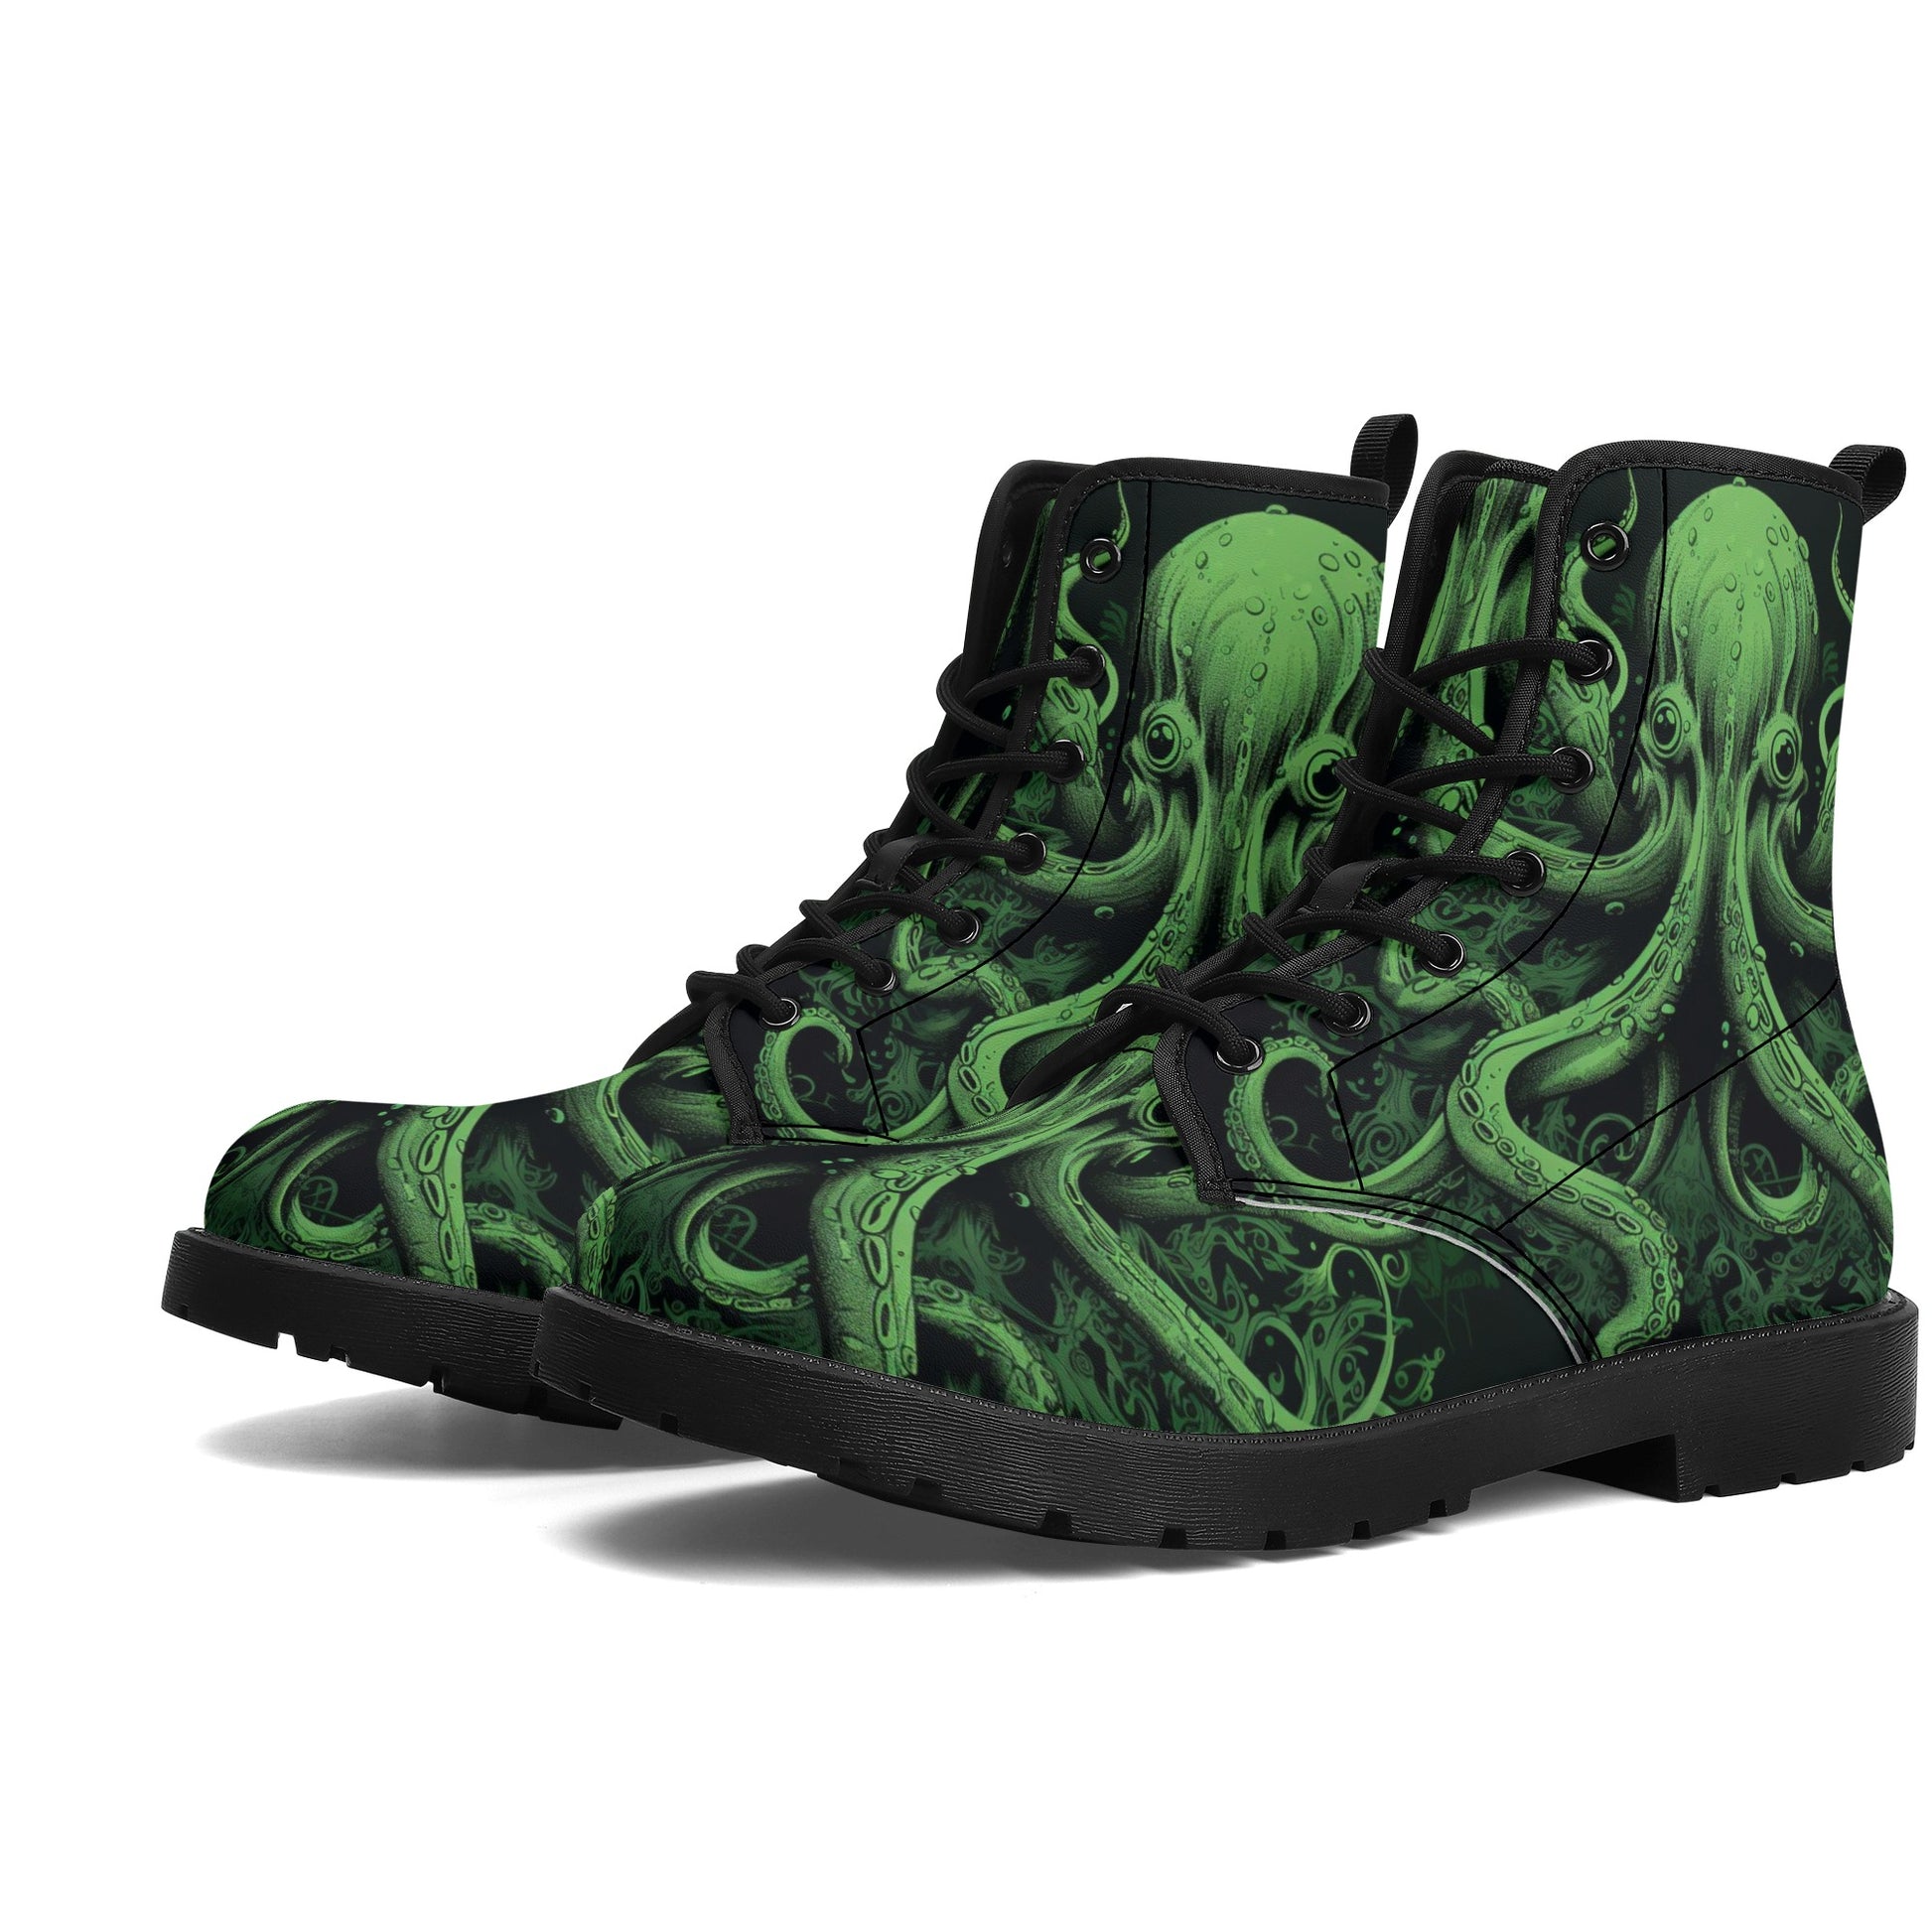 Octopus Men Leather Boots, Tentacles Green Vegan Lace Up Shoes Hiking Festival Black Ankle Combat Work Winter Waterproof Custom Gift Starcove Fashion